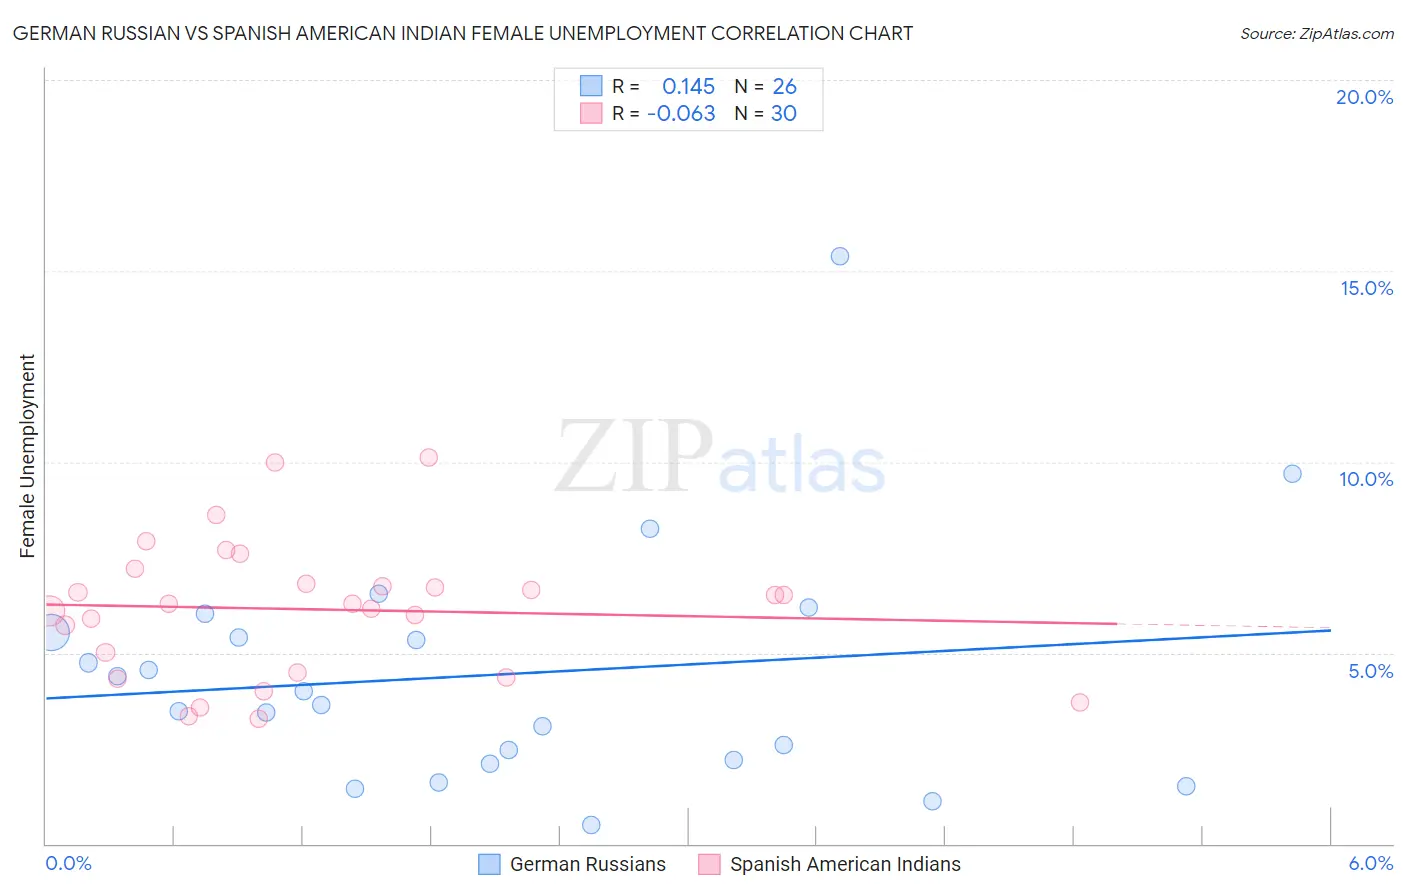 German Russian vs Spanish American Indian Female Unemployment